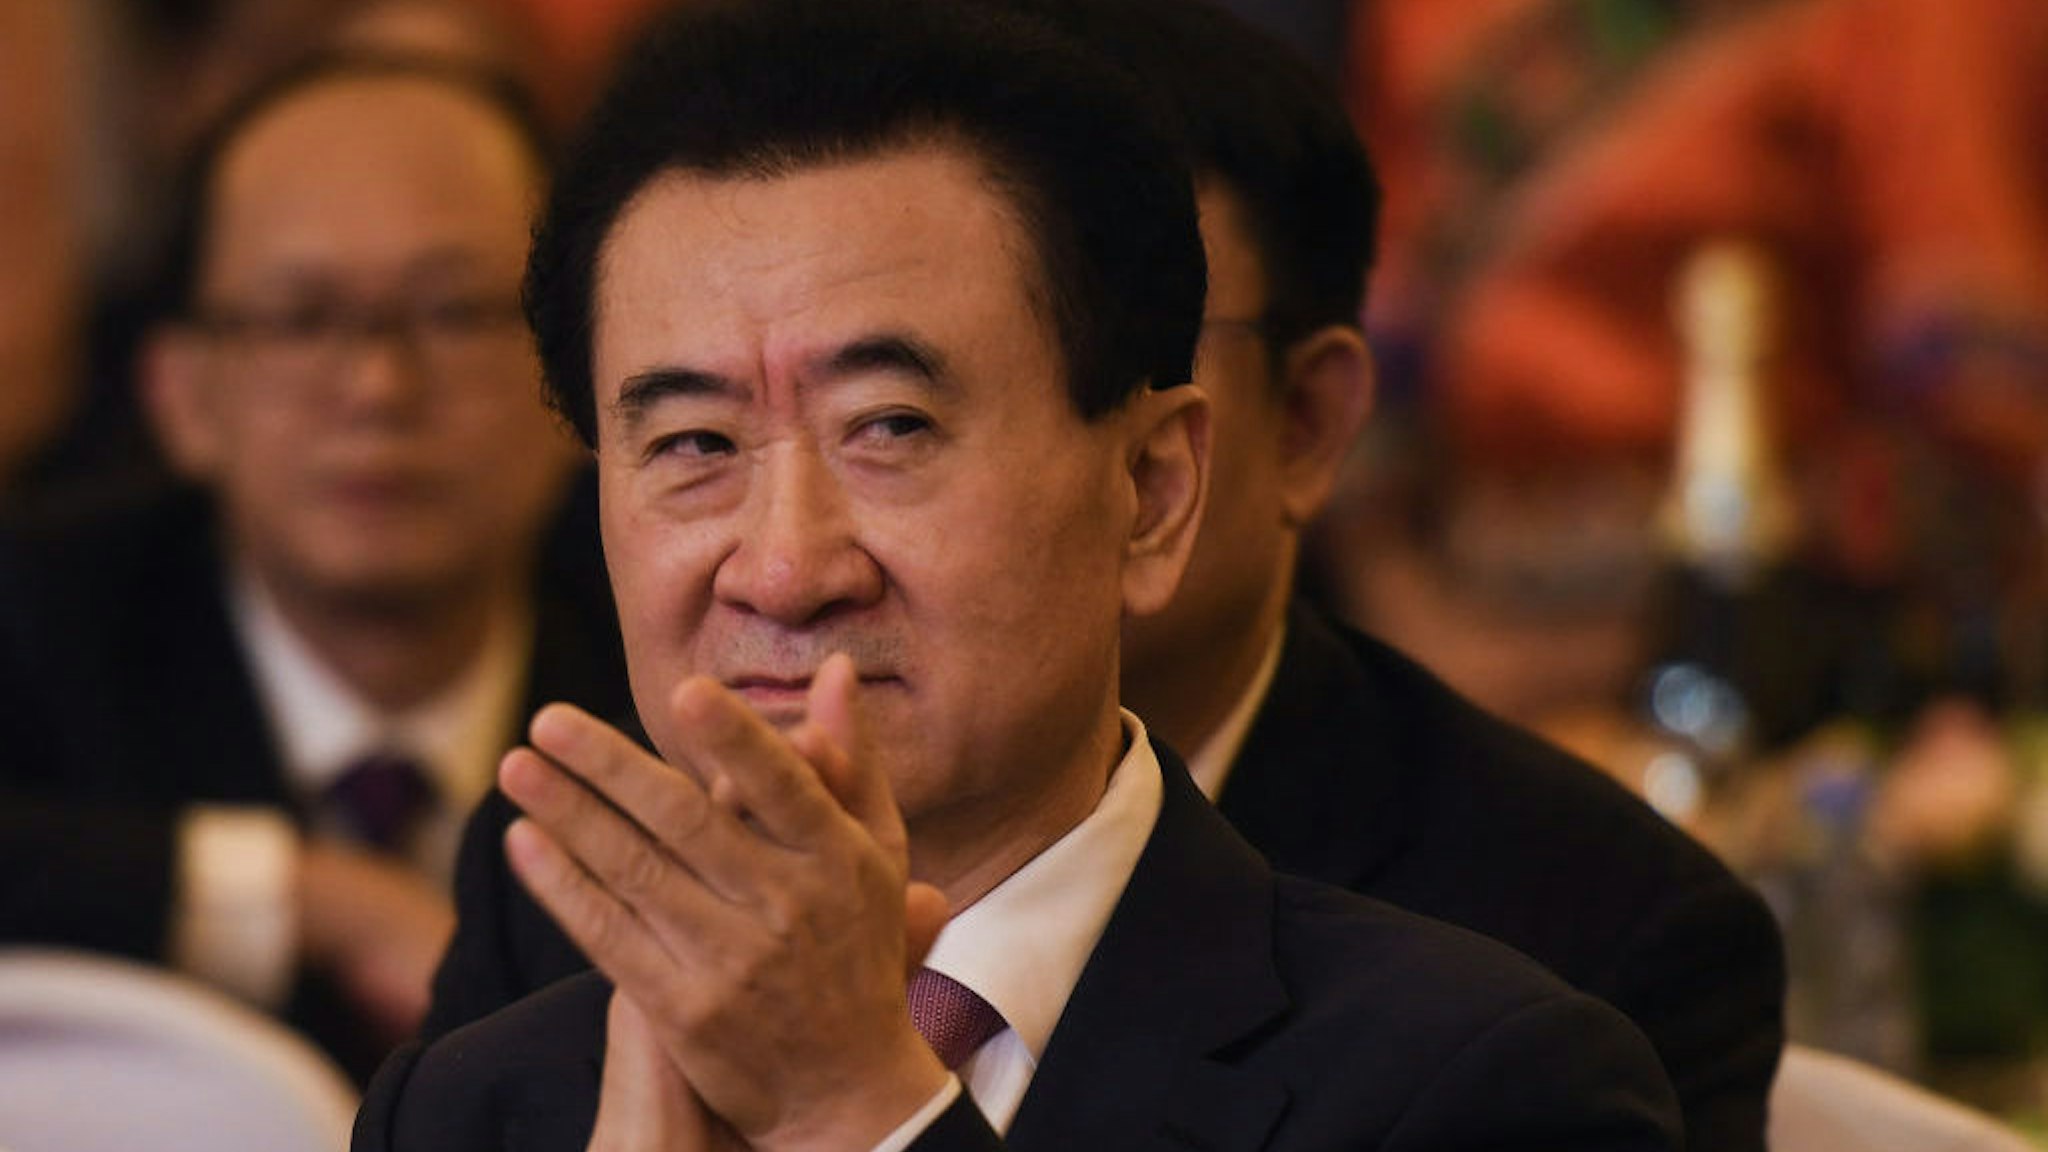 Jianlin Wang, a Chinese business magnate, investor, politician, and philanthropist, and also the founder of the conglomerate company Dalian Wanda Group, seen during the 5th UCI Cycling Gala in Guilin. On Tuesday, October 22, 2019, in Guilin, Guangxi Region, China. (Photo by Artur Widak/NurPhoto)